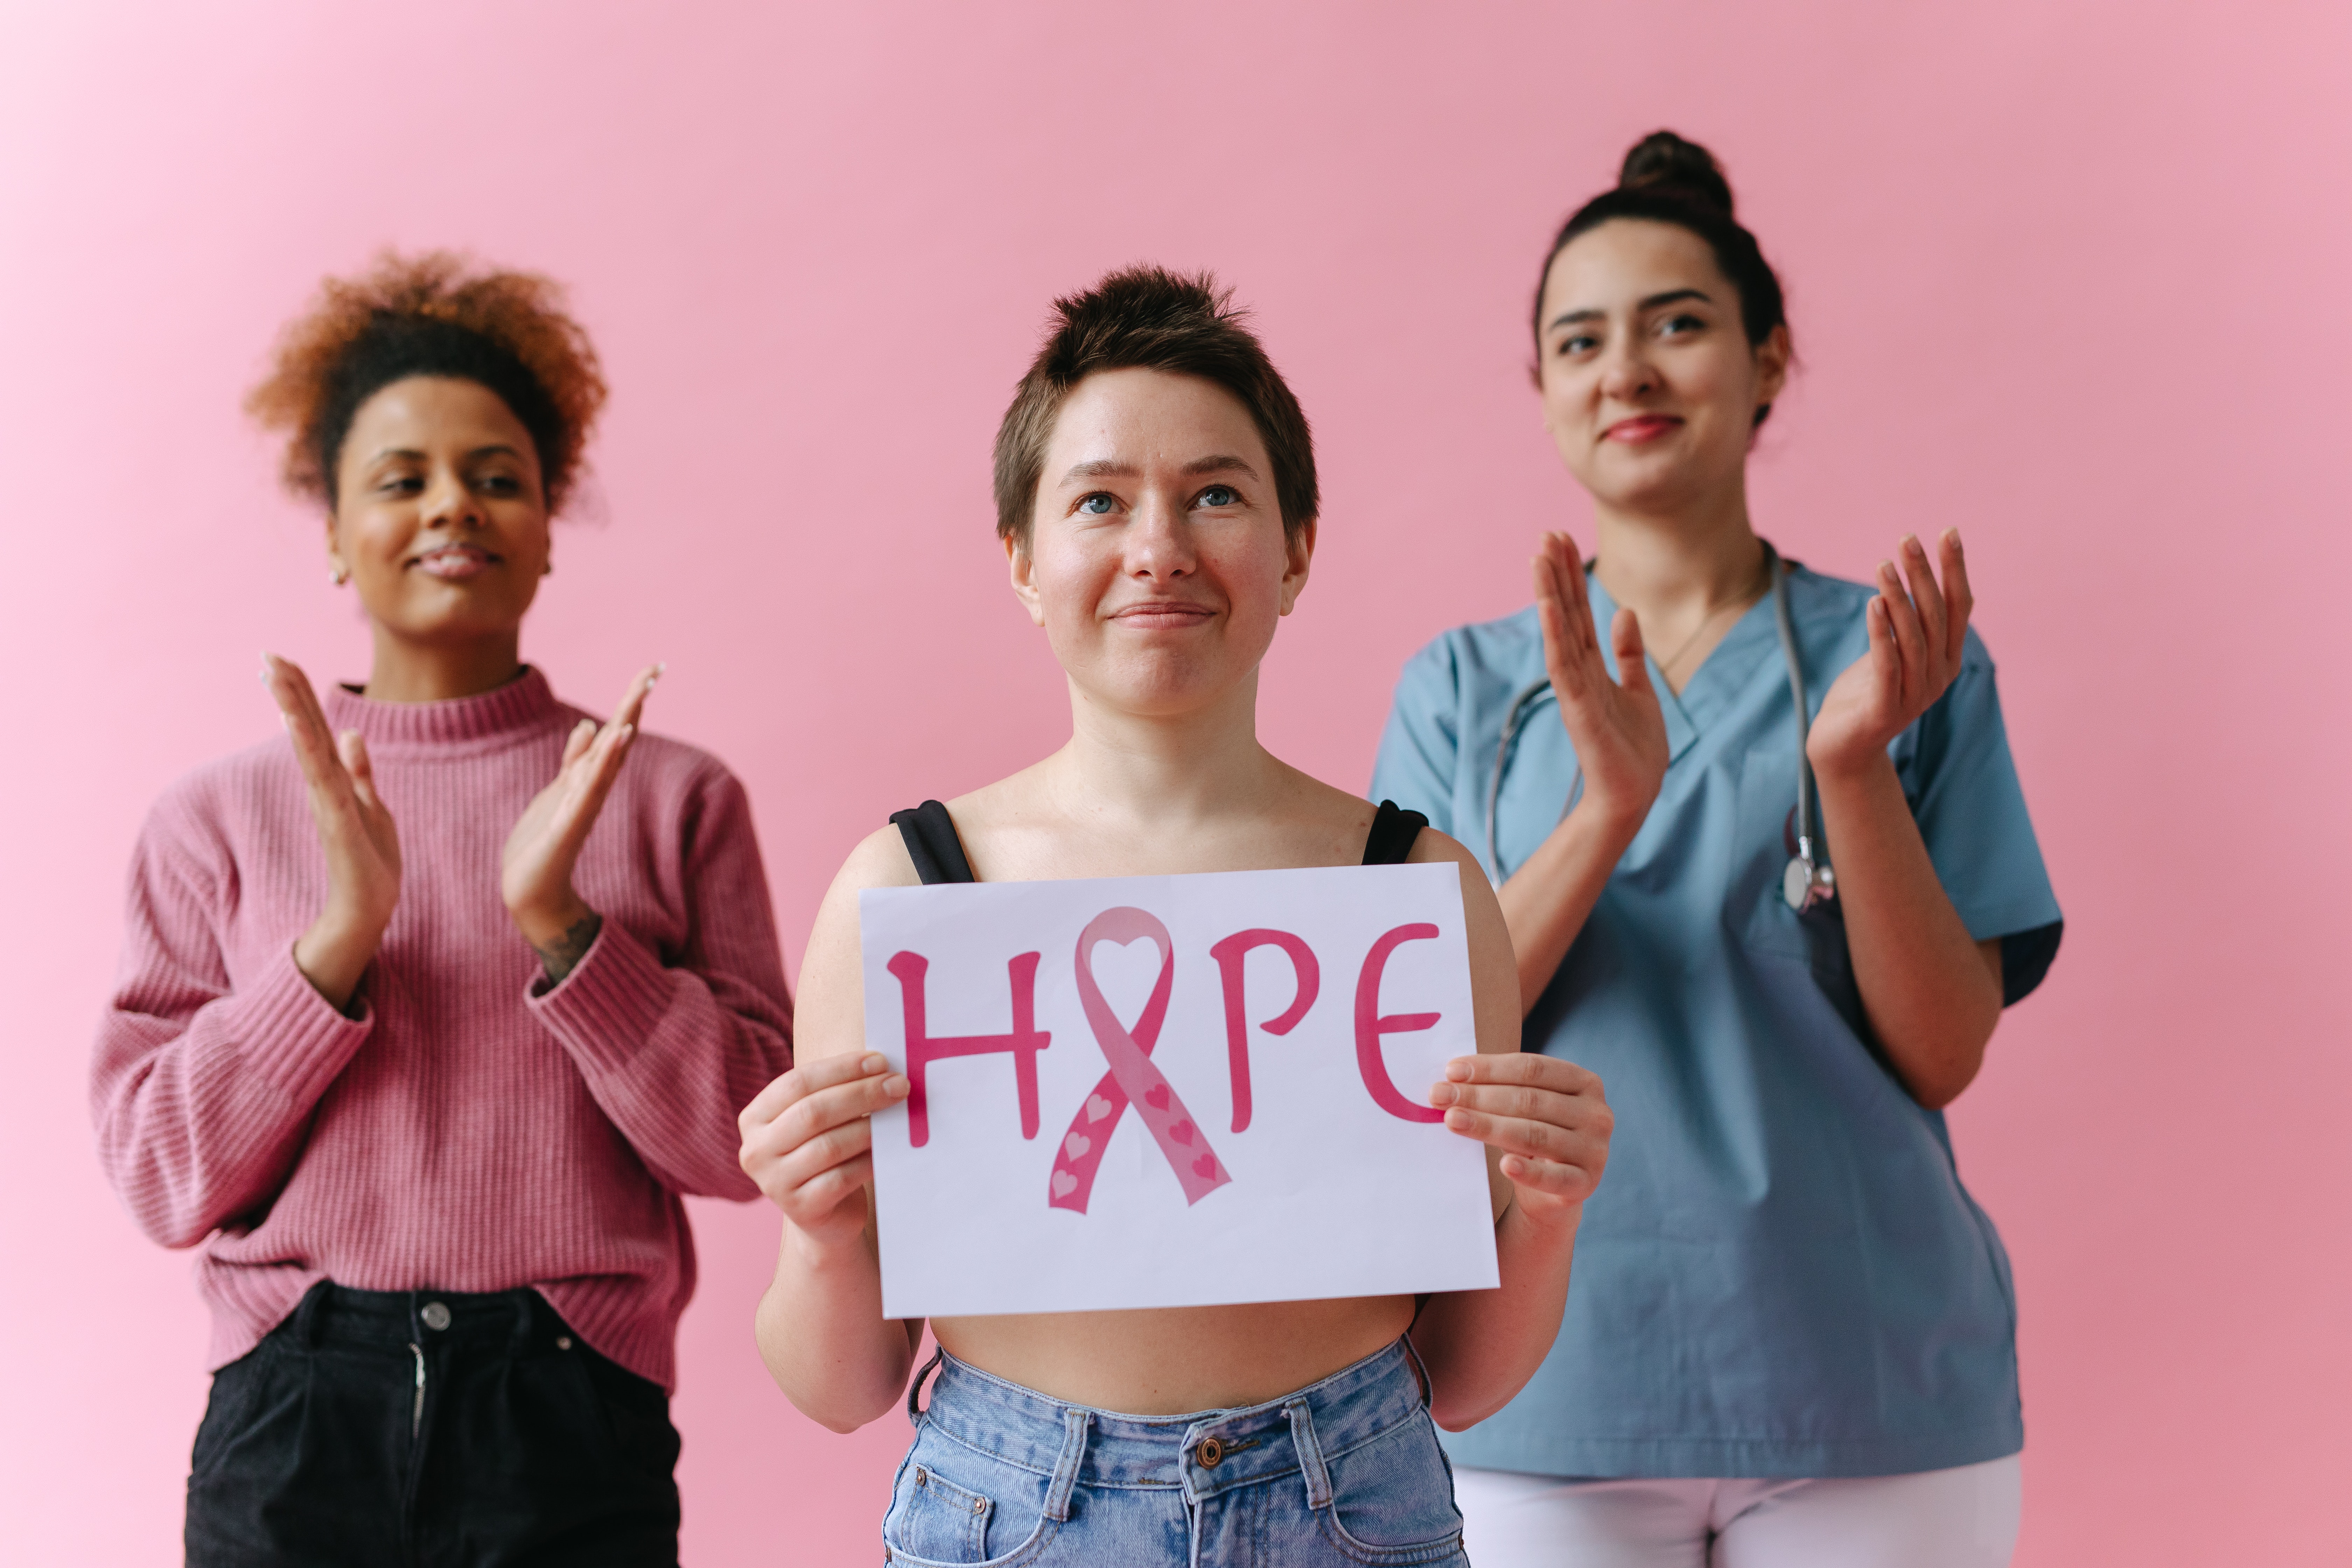 Woman holding a breast cancer awareness sign reading "hope" applauded by her friends